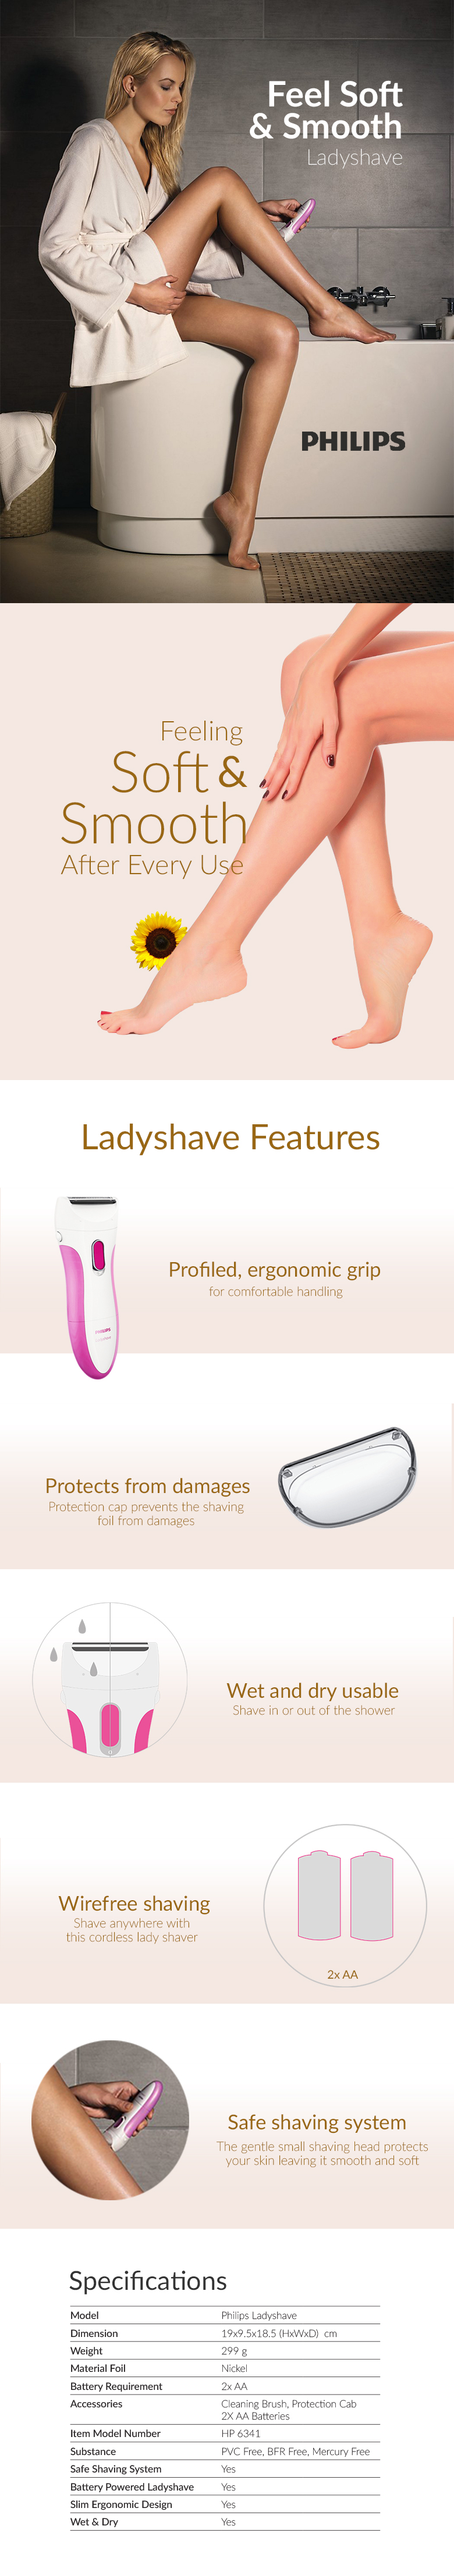 Philips HP6341 - 00 Ladyshave Wet & Dry PD